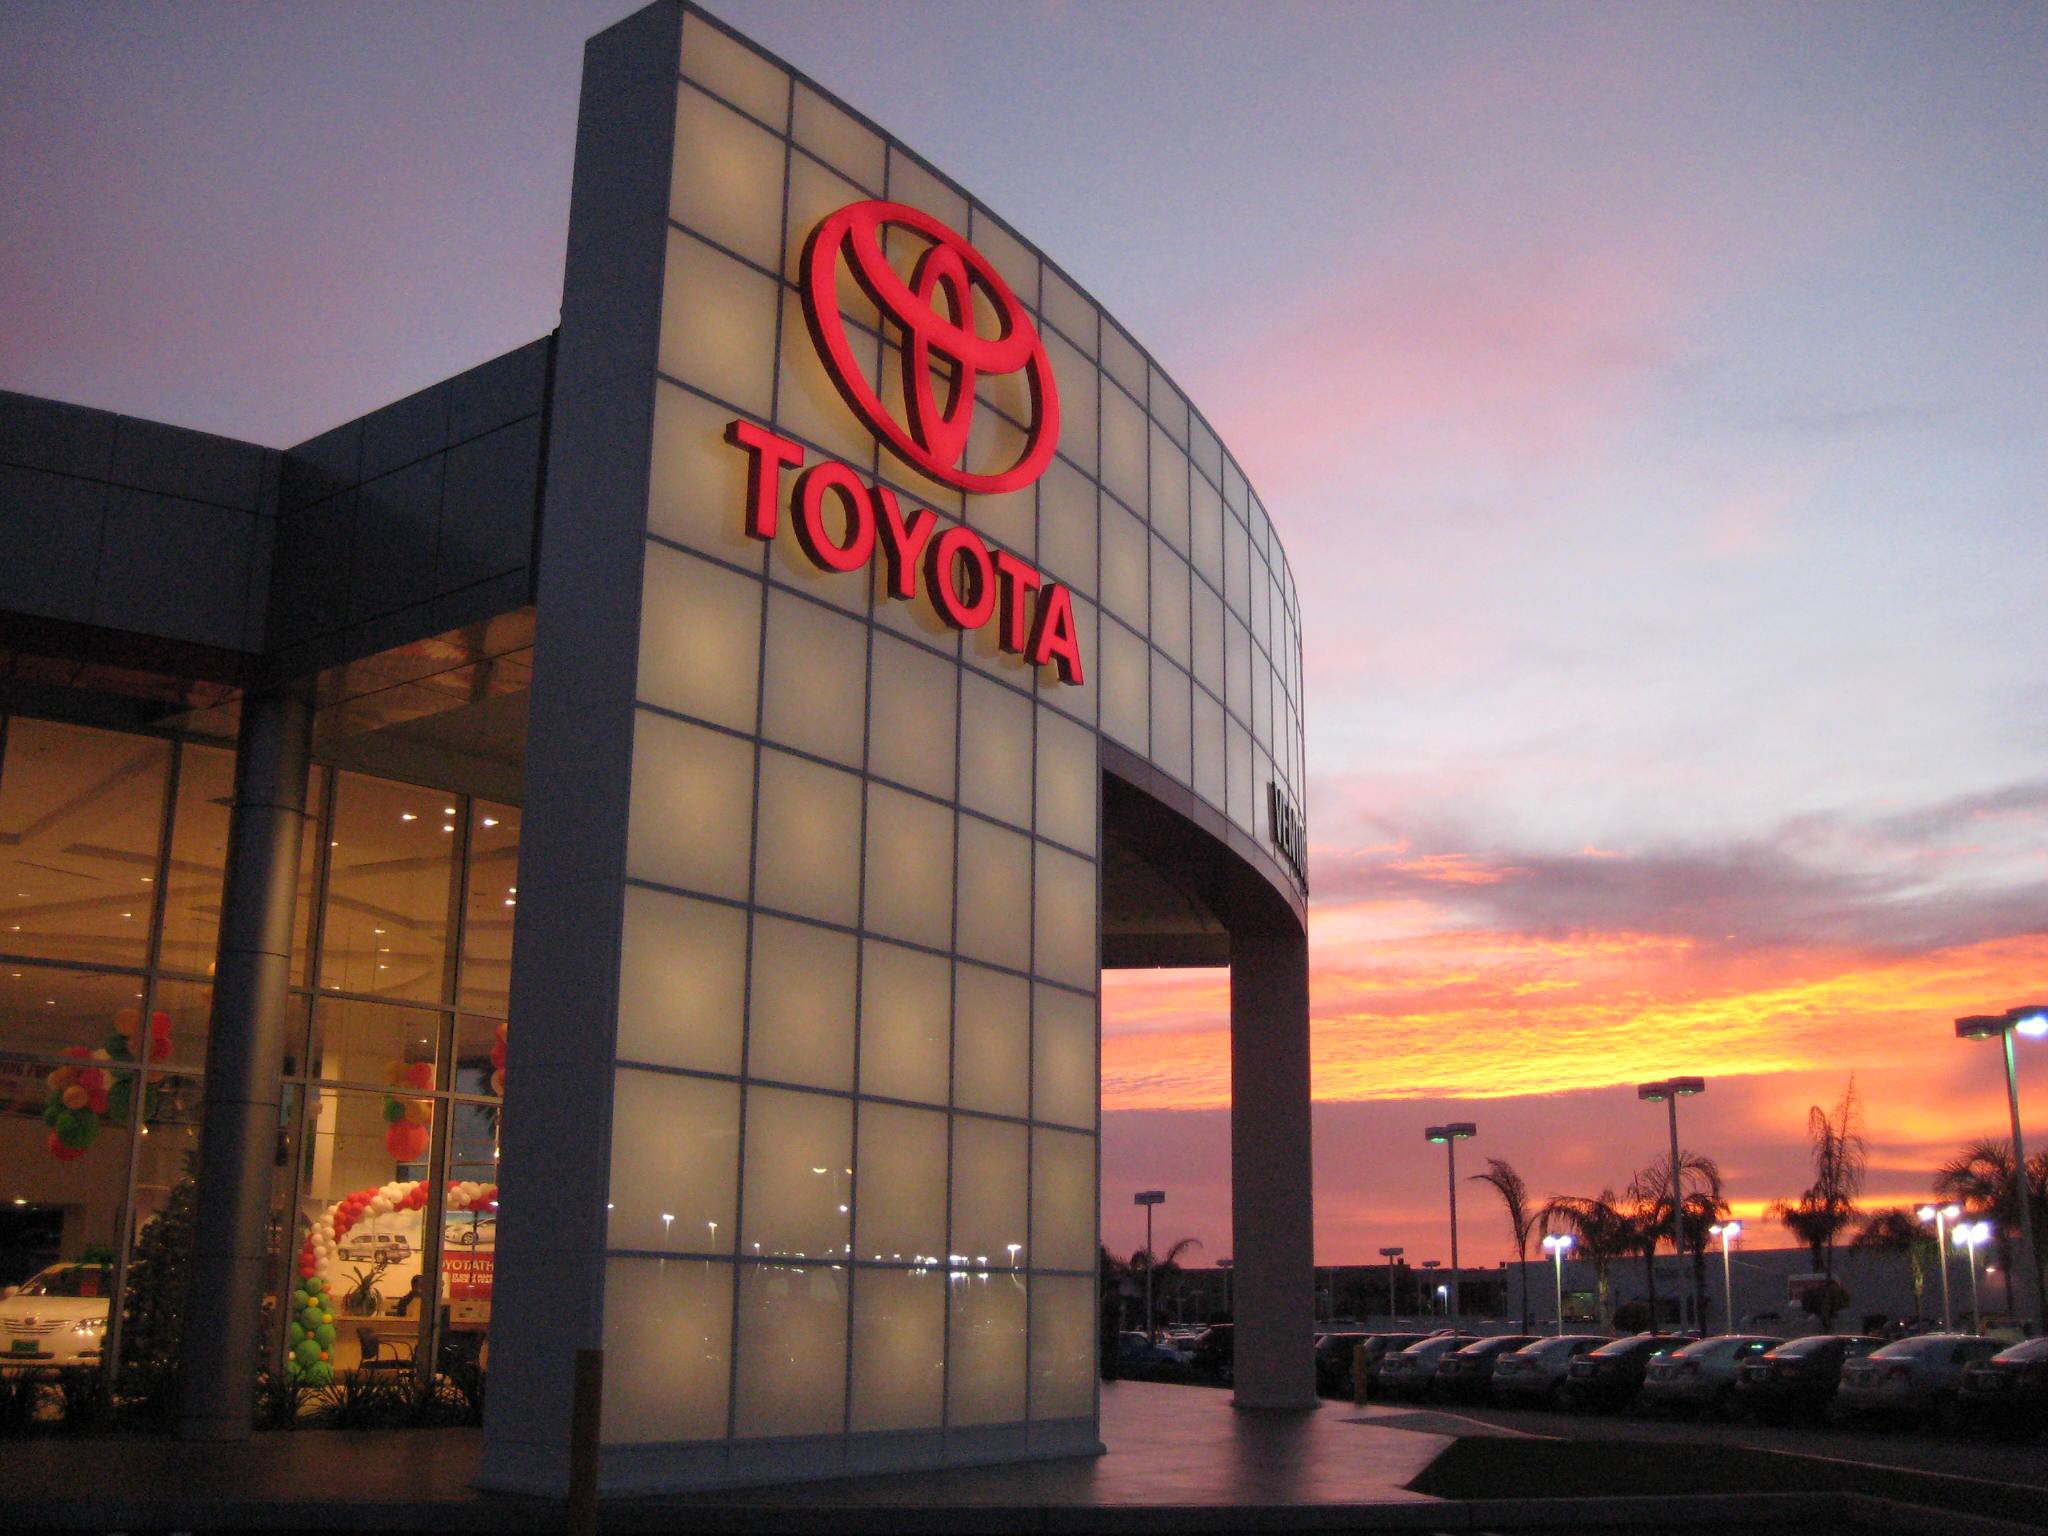 Picture of the Ventura Toyota dealership in Ventura, California during a sunset